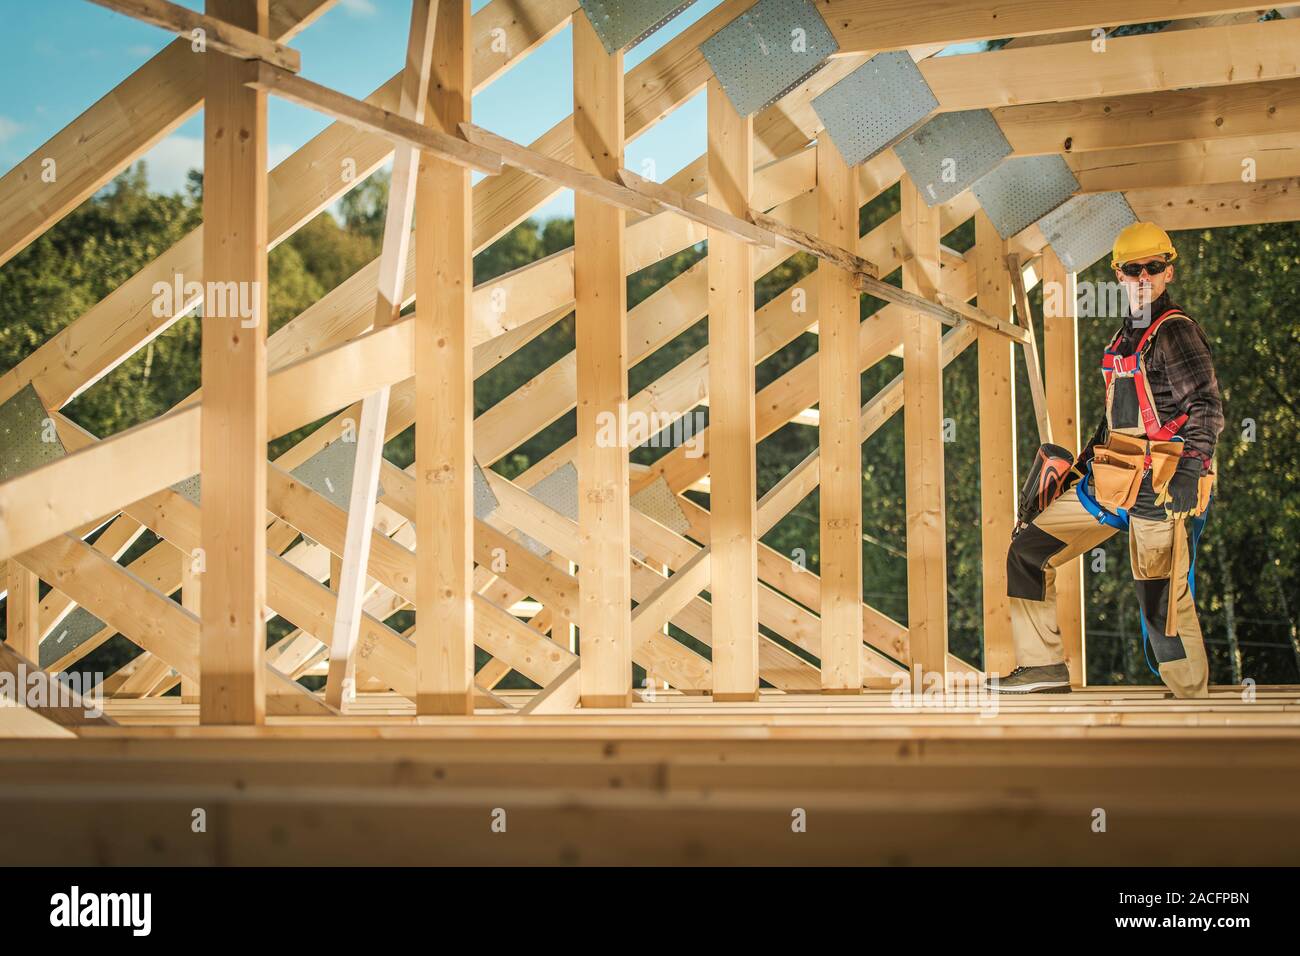 Wood Skeleton Frame Construction Contractor Worker in His 30s. Residential Development. Industrial Theme. Stock Photo